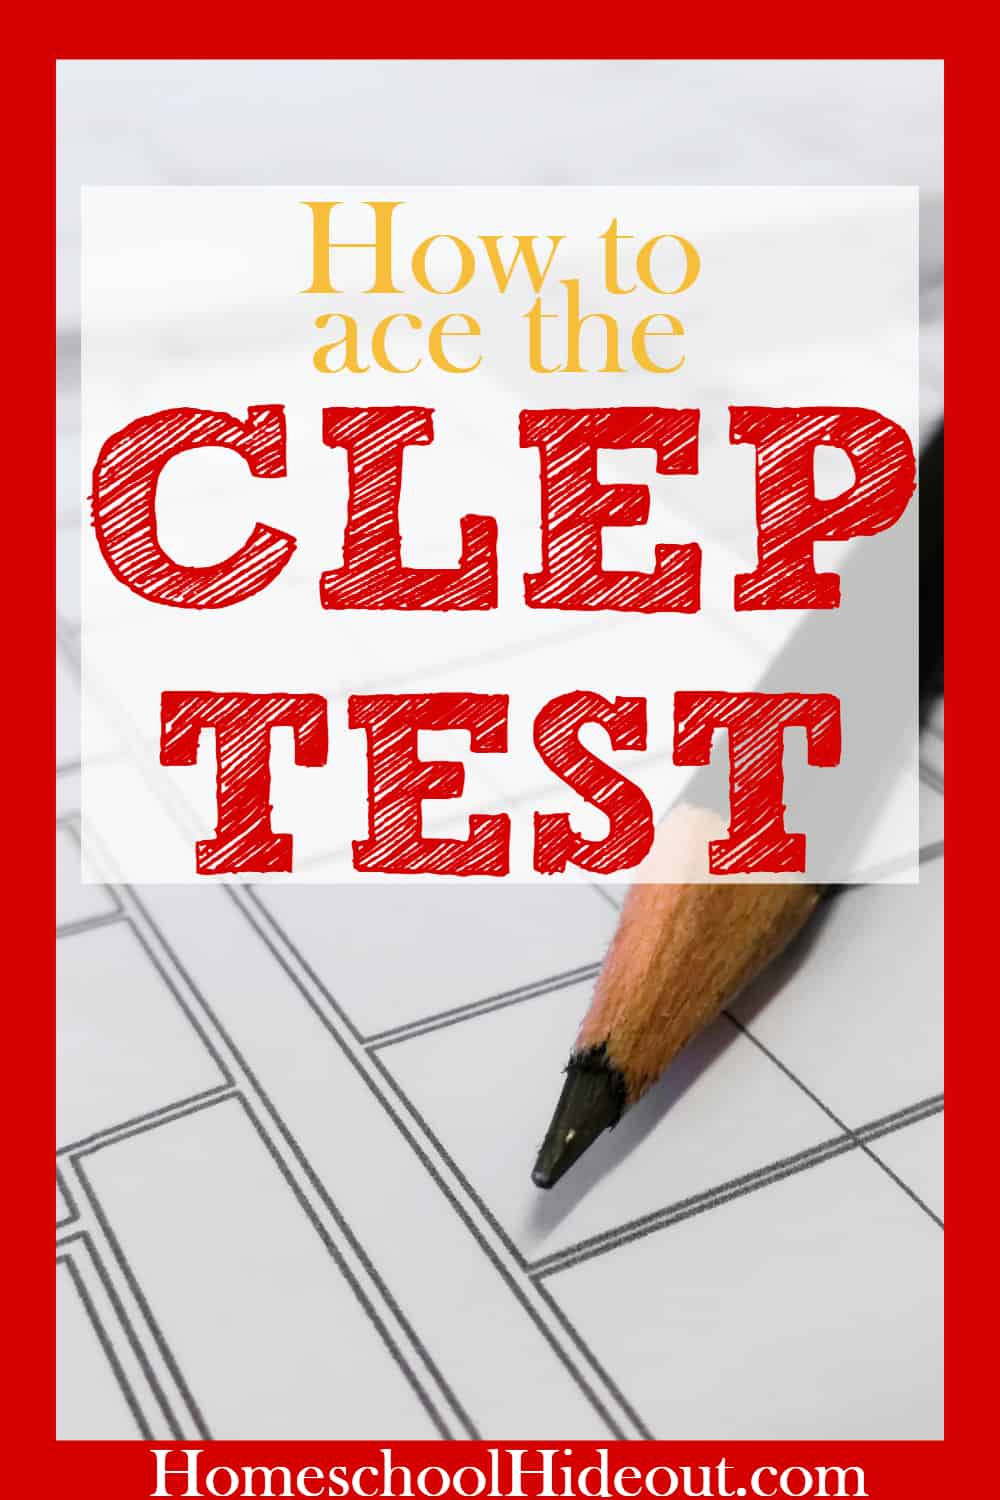 Save thousands of dollars and shave up to 2 years off of your college tuition using Study.com's CLEP test prep. Gain confidence and learn the tips to taking advantage of CLEP tests.